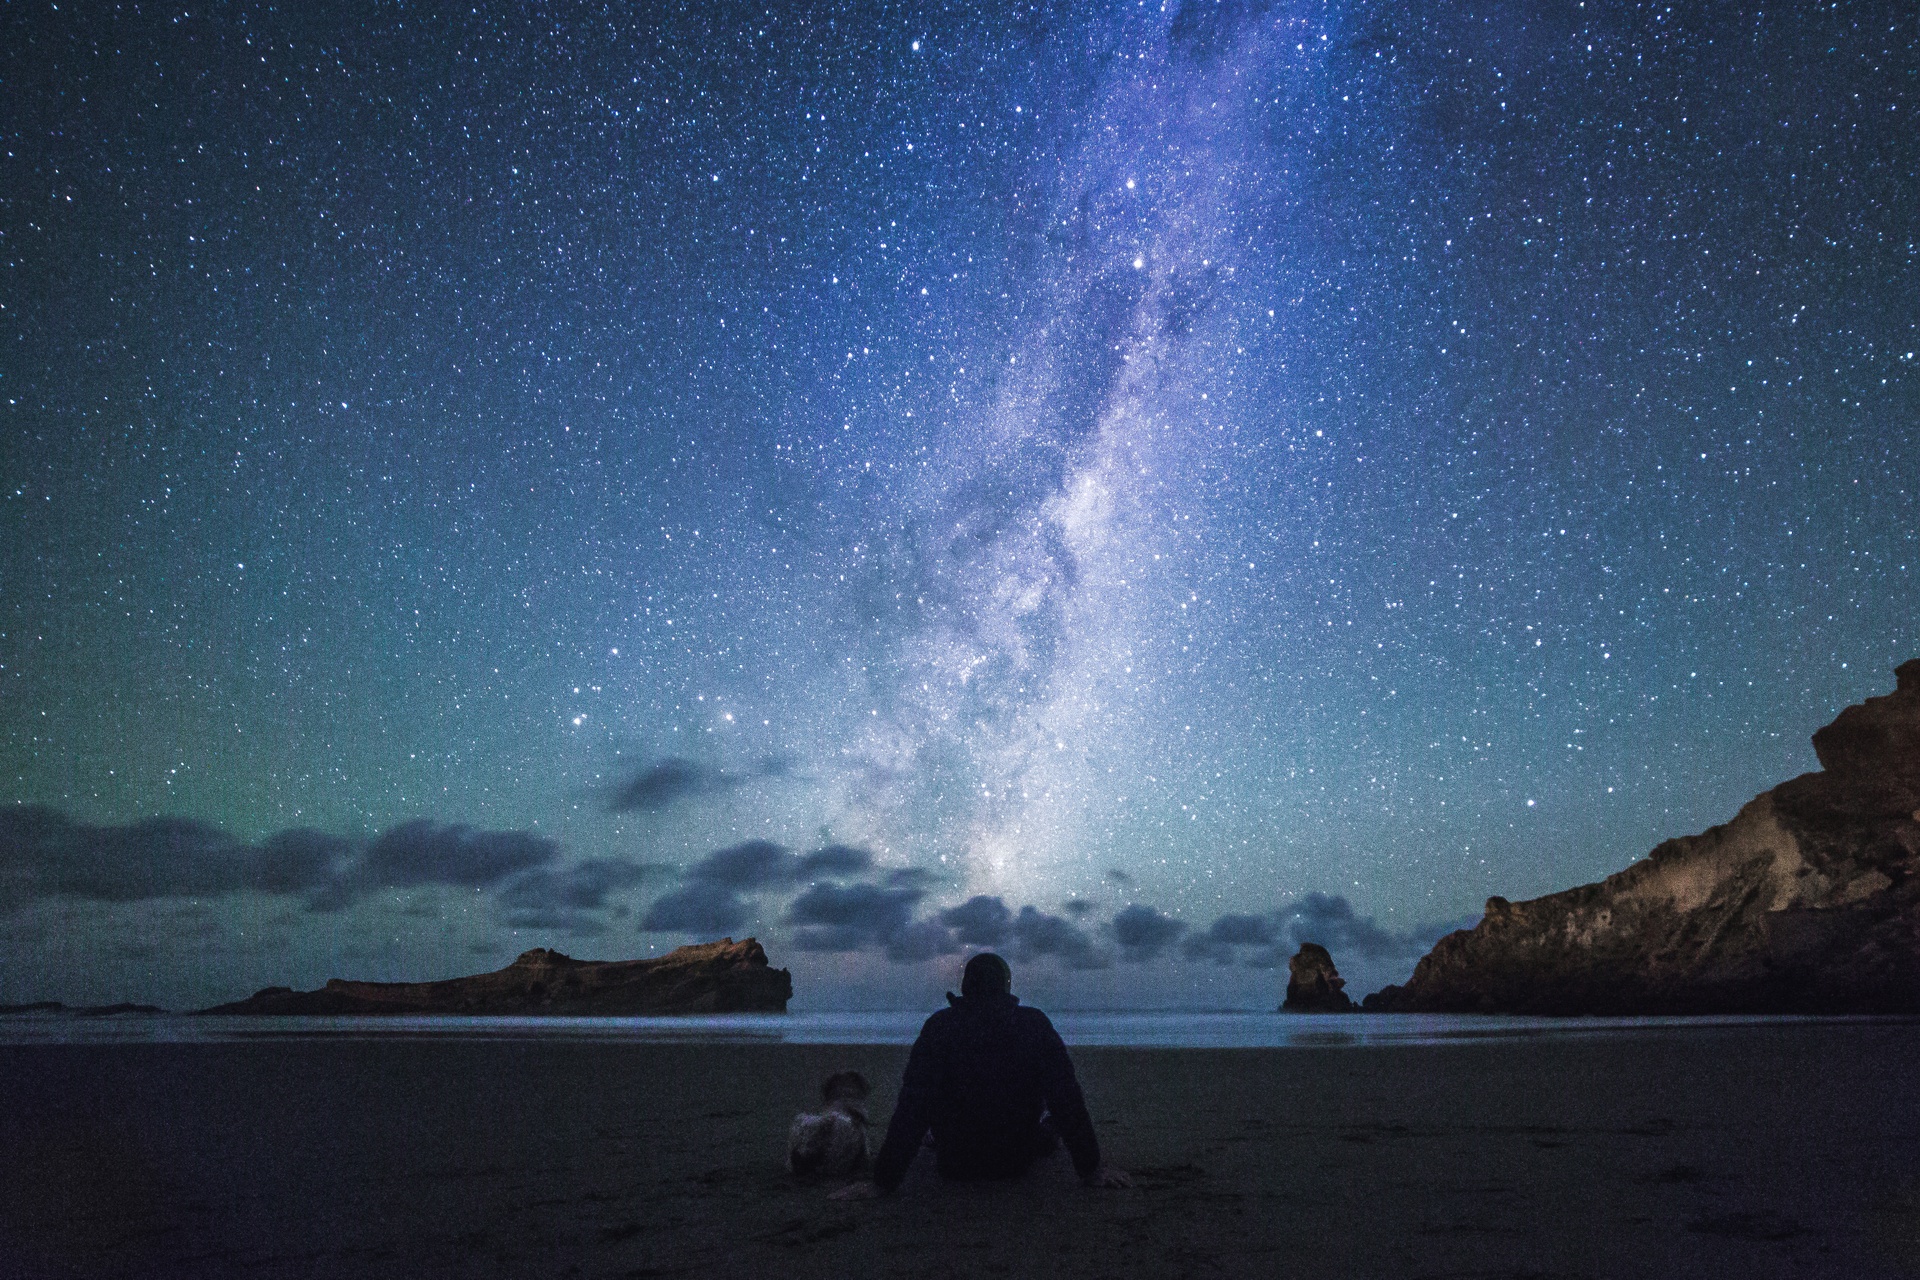 Night sky at Castlepoint in the Wairarapa. Image courtesy Daniel Rood and TNZ